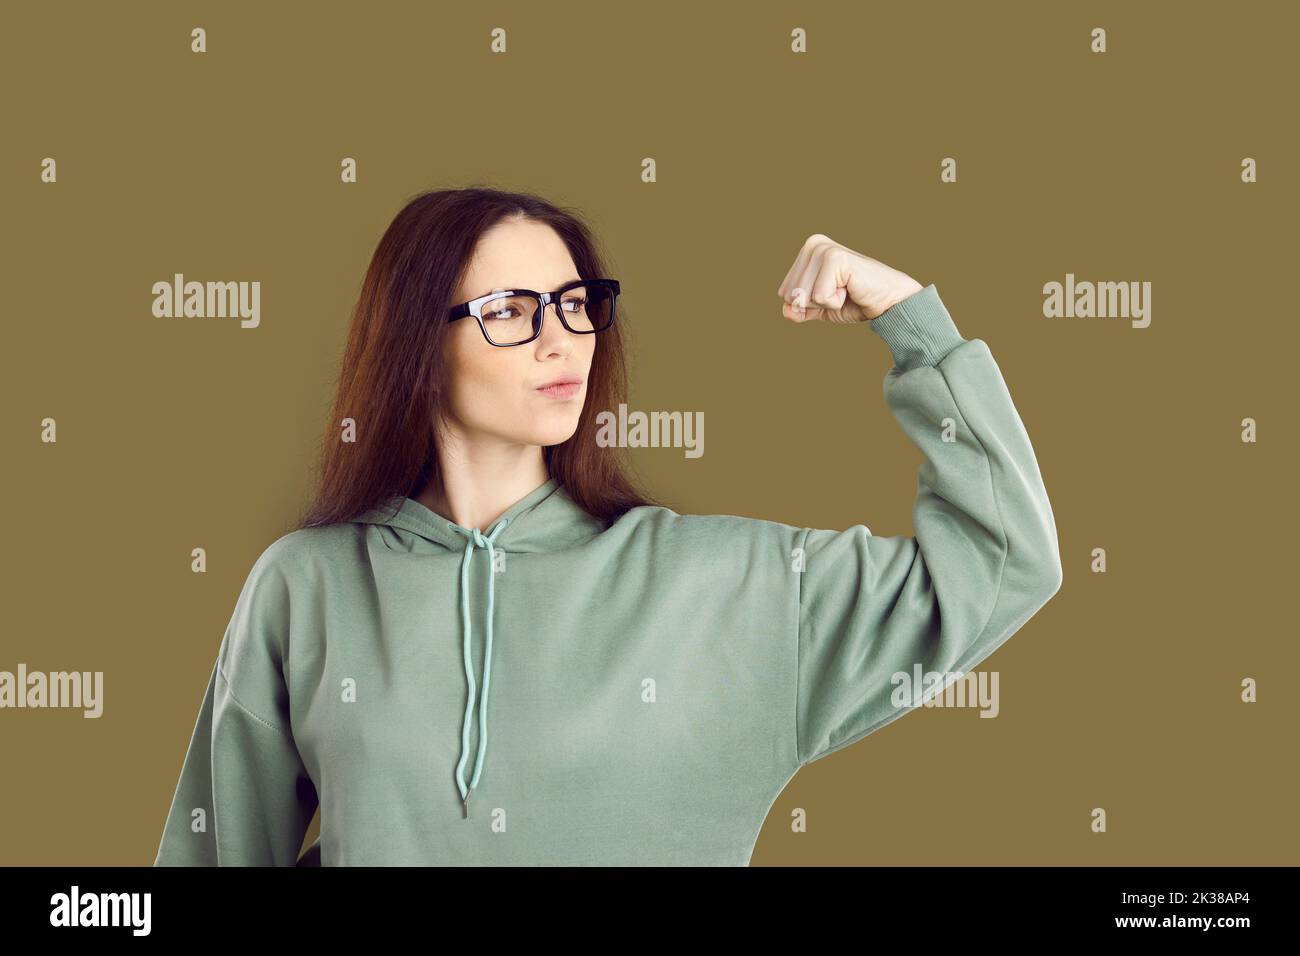 Confident strong young girl flexing her arm and showing her power isolated on brown background Stock Photo